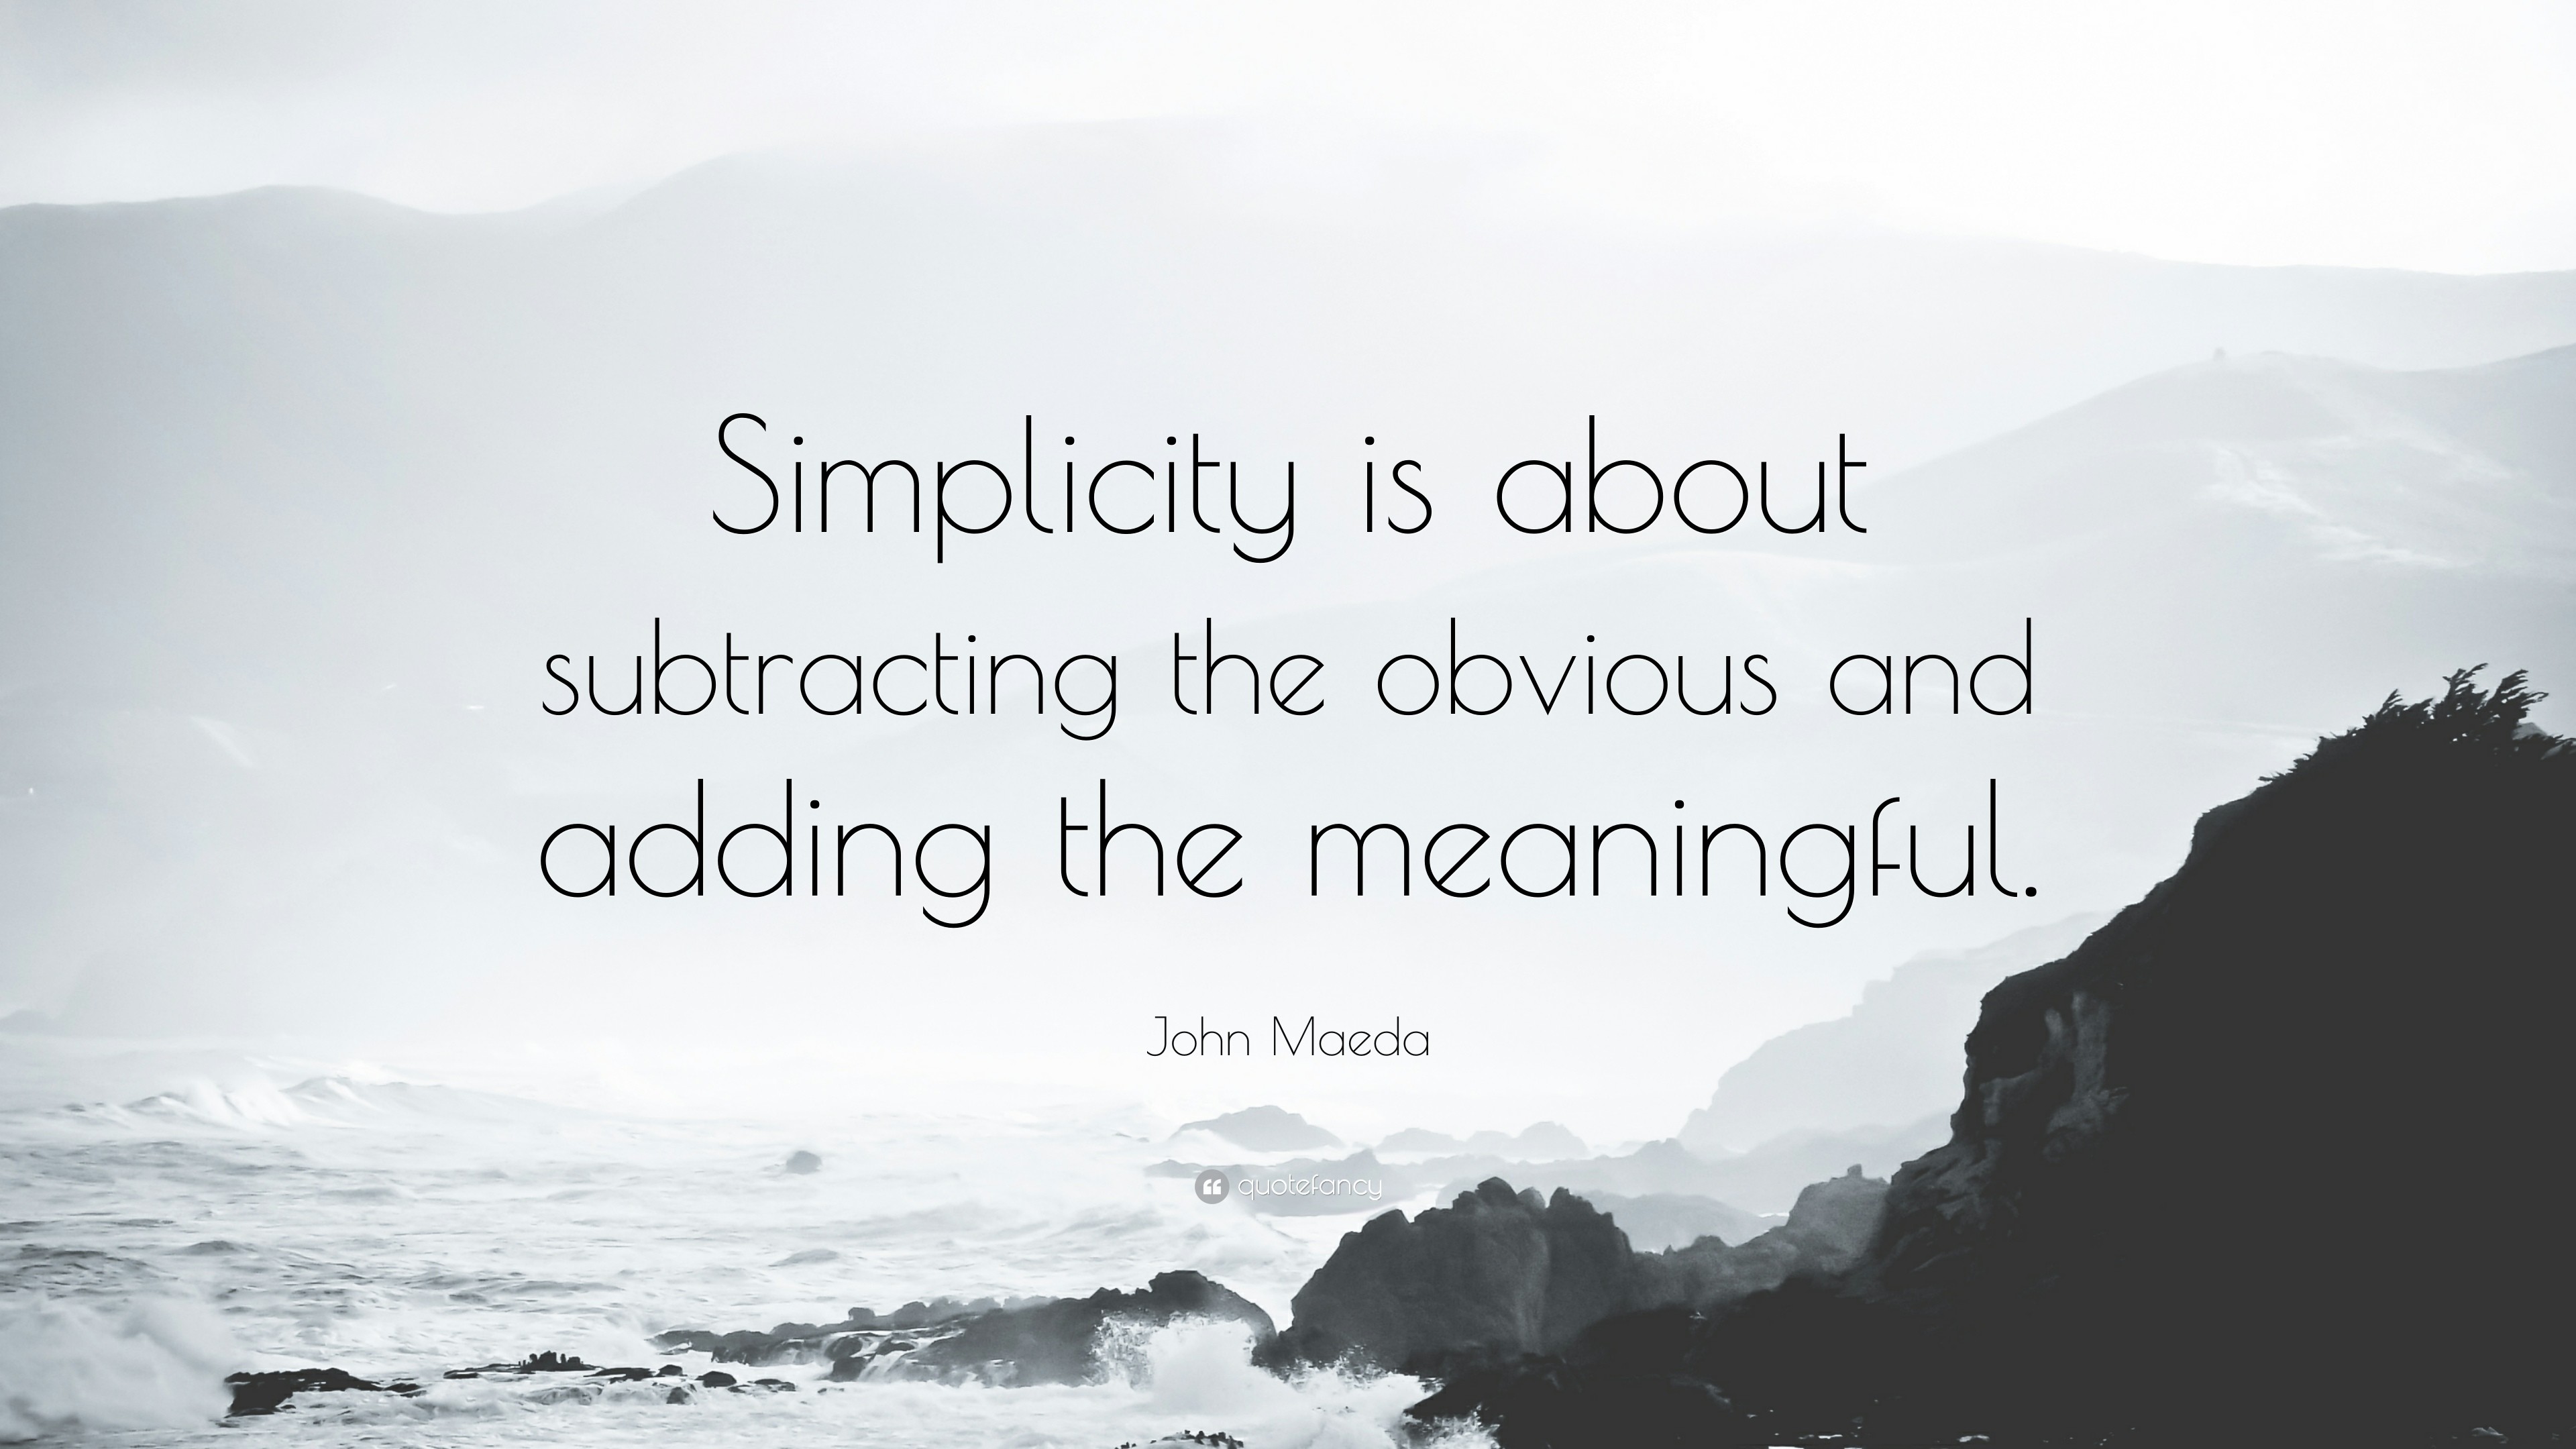 3840x2160 John Maeda Quote: “Simplicity is about subtracting the obvious and adding  the meaningful.